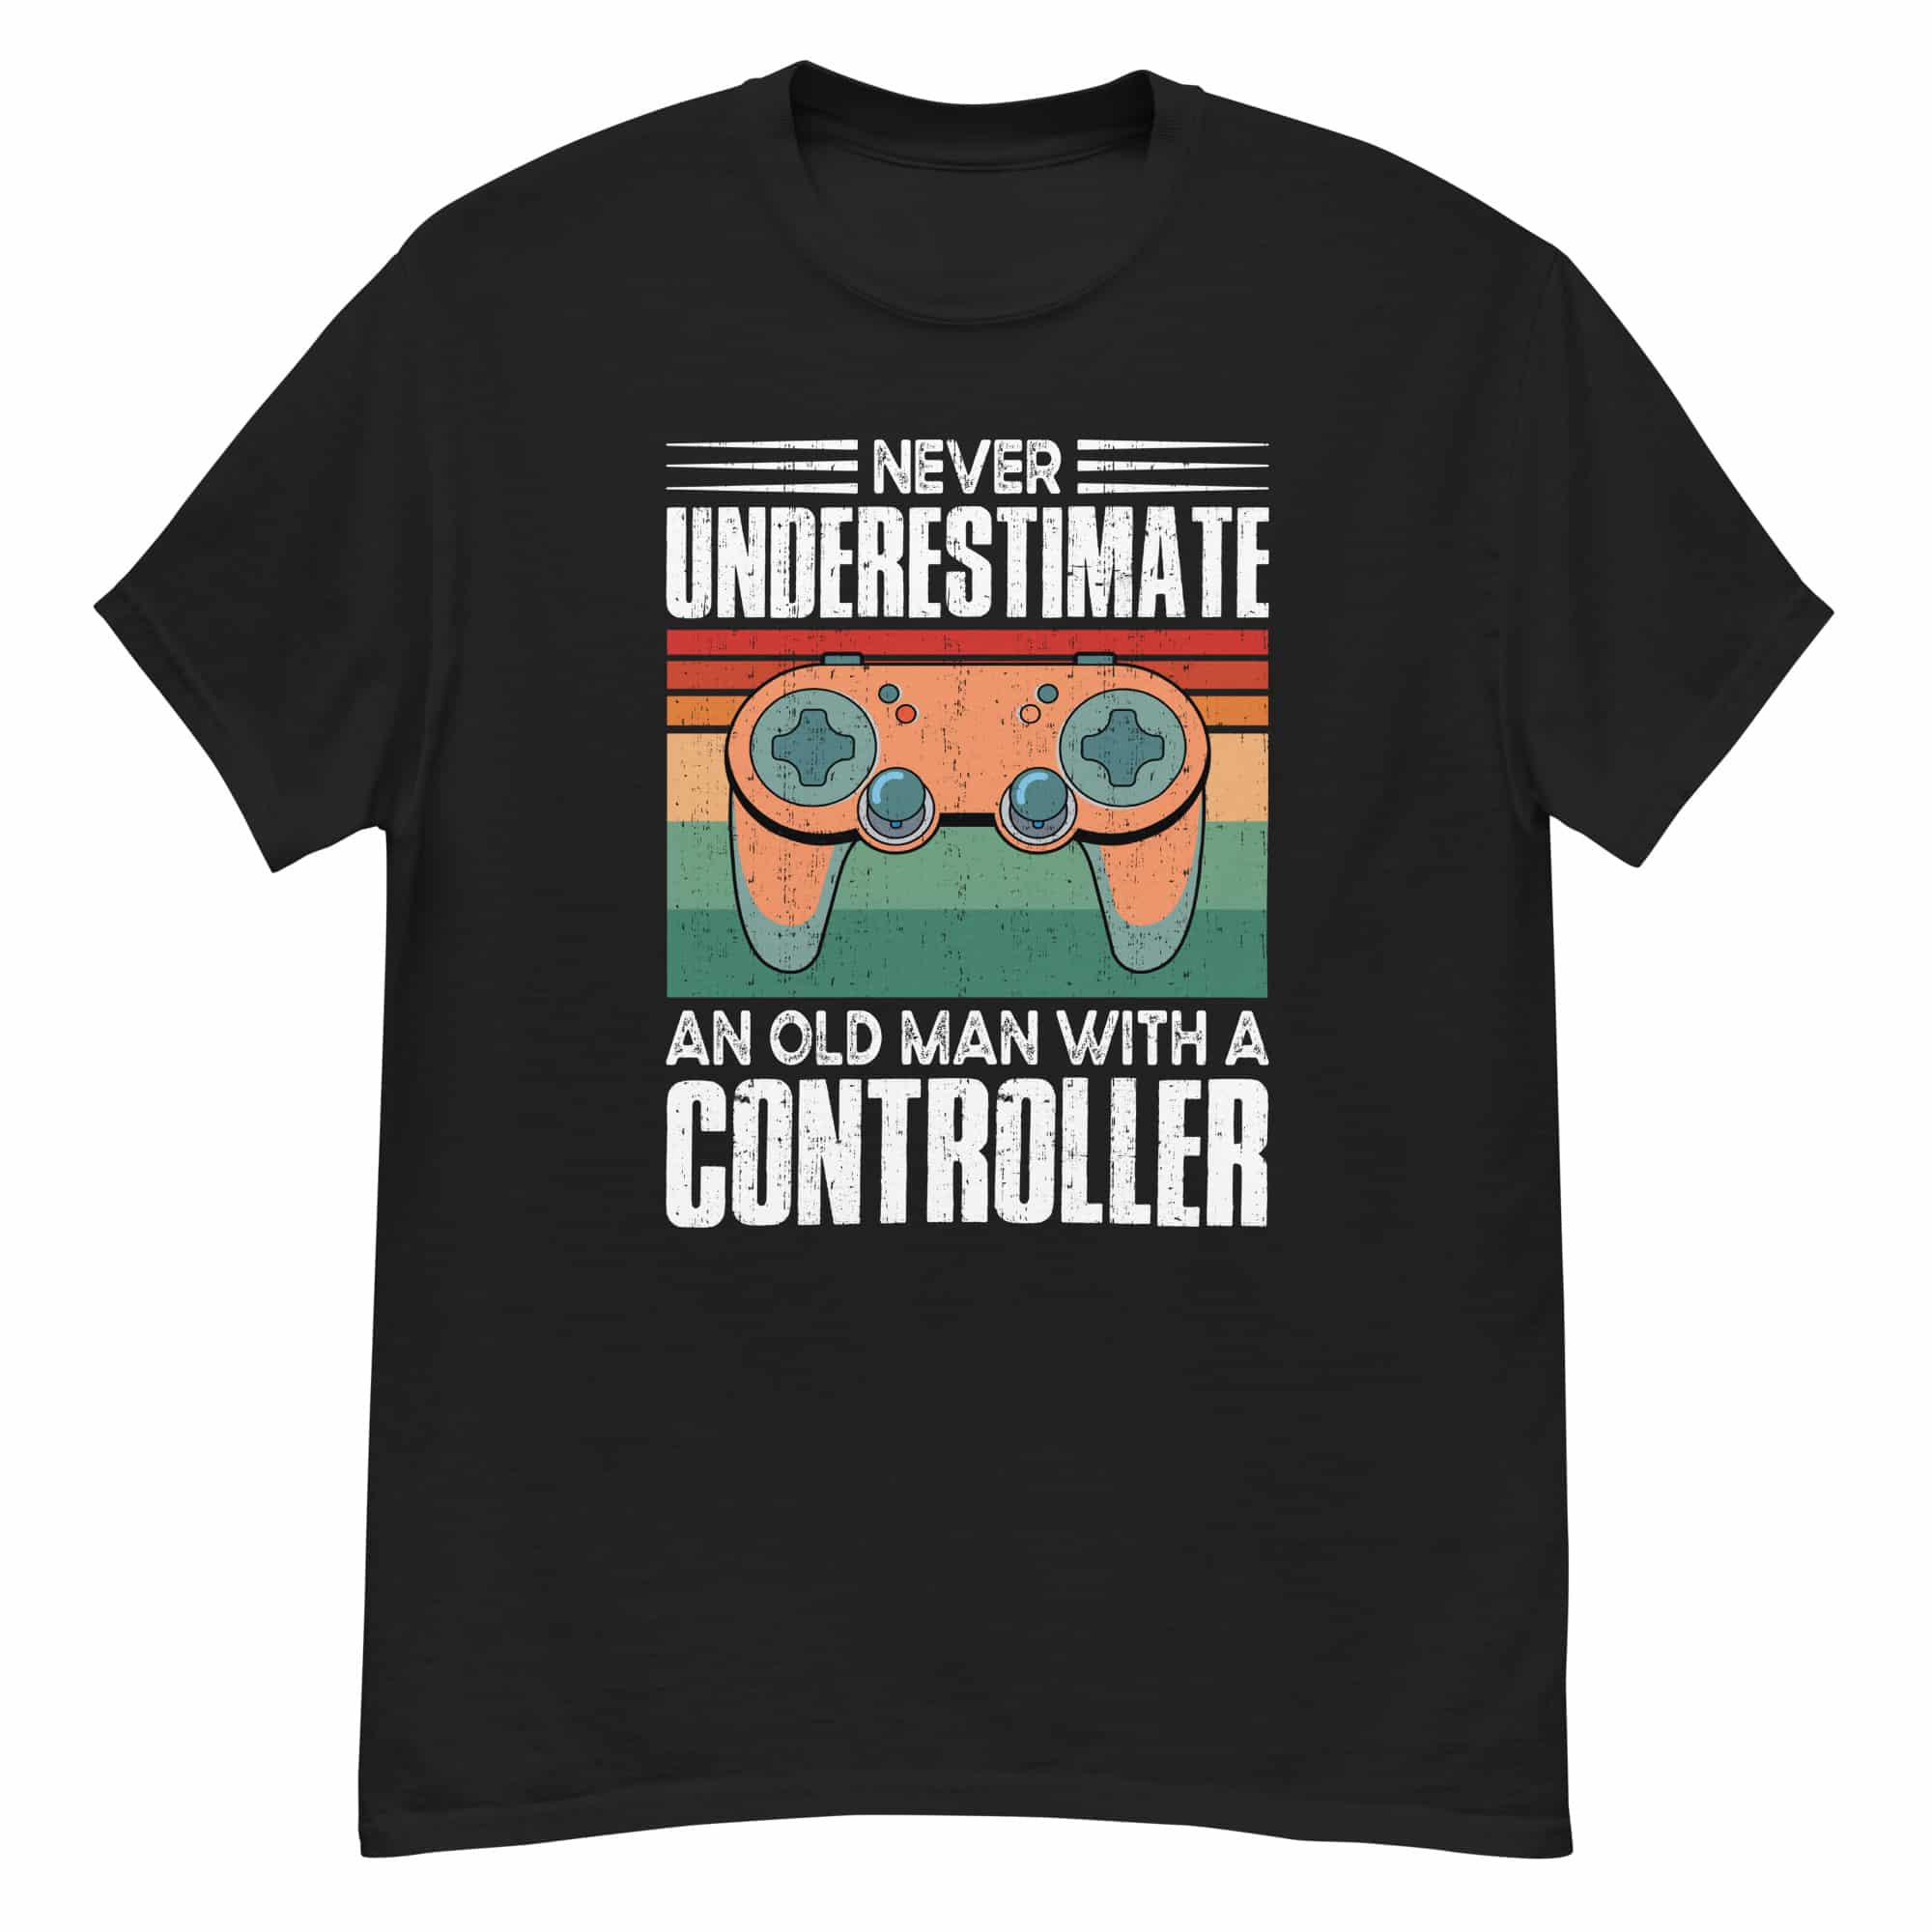 Never Underestimate Shirt Video game store Gaming merchandise Gaming accessories shop Online gaming store Video game shop near me Gaming console store PC gaming store Gaming gear shop Retro gaming shop Board game shop Anime merchandise Anime store online Japanese anime shop Anime figurines Manga shop Anime DVDs Anime accessories Anime apparel Anime collectibles Anime gifts